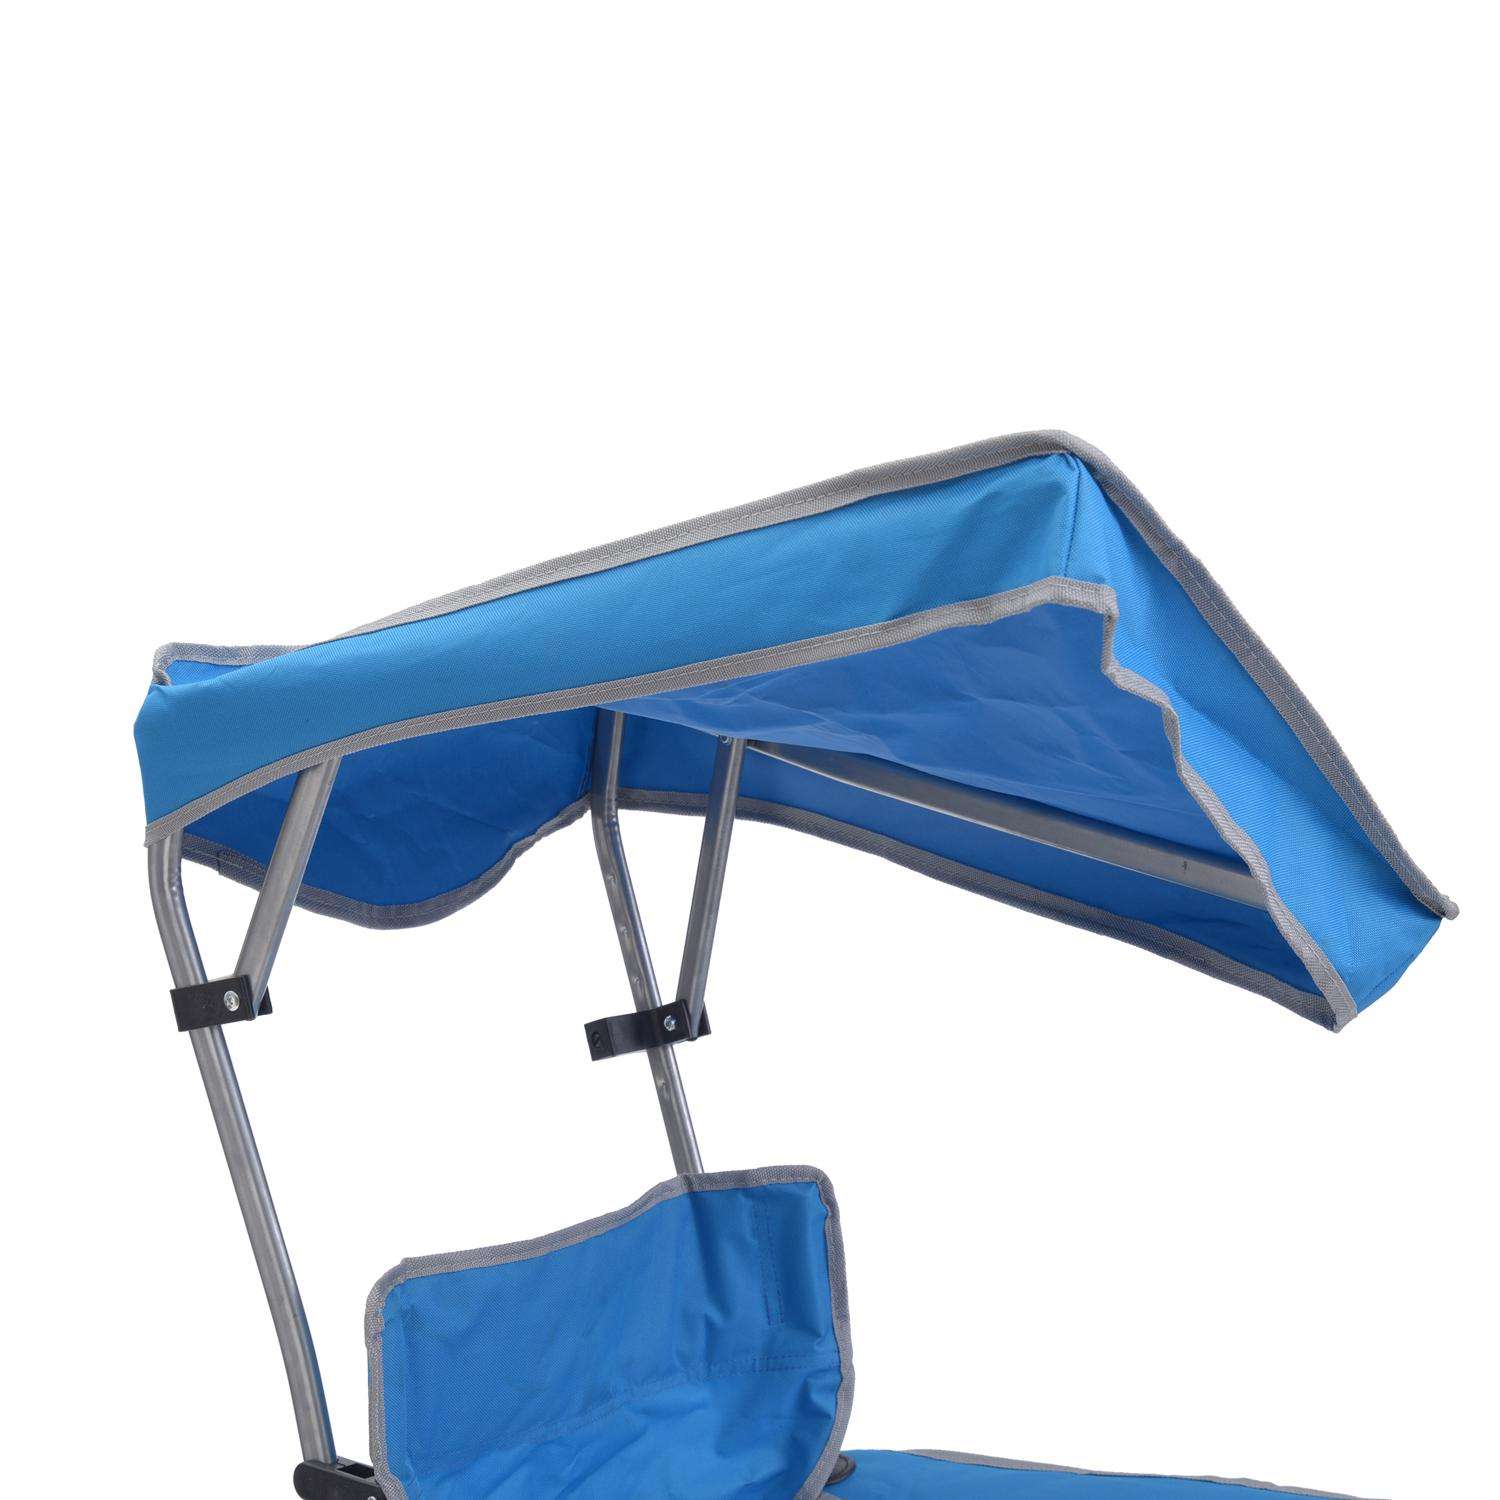 Quik Shade Canopy Weight Bags, 4-Pack at Tractor Supply Co.